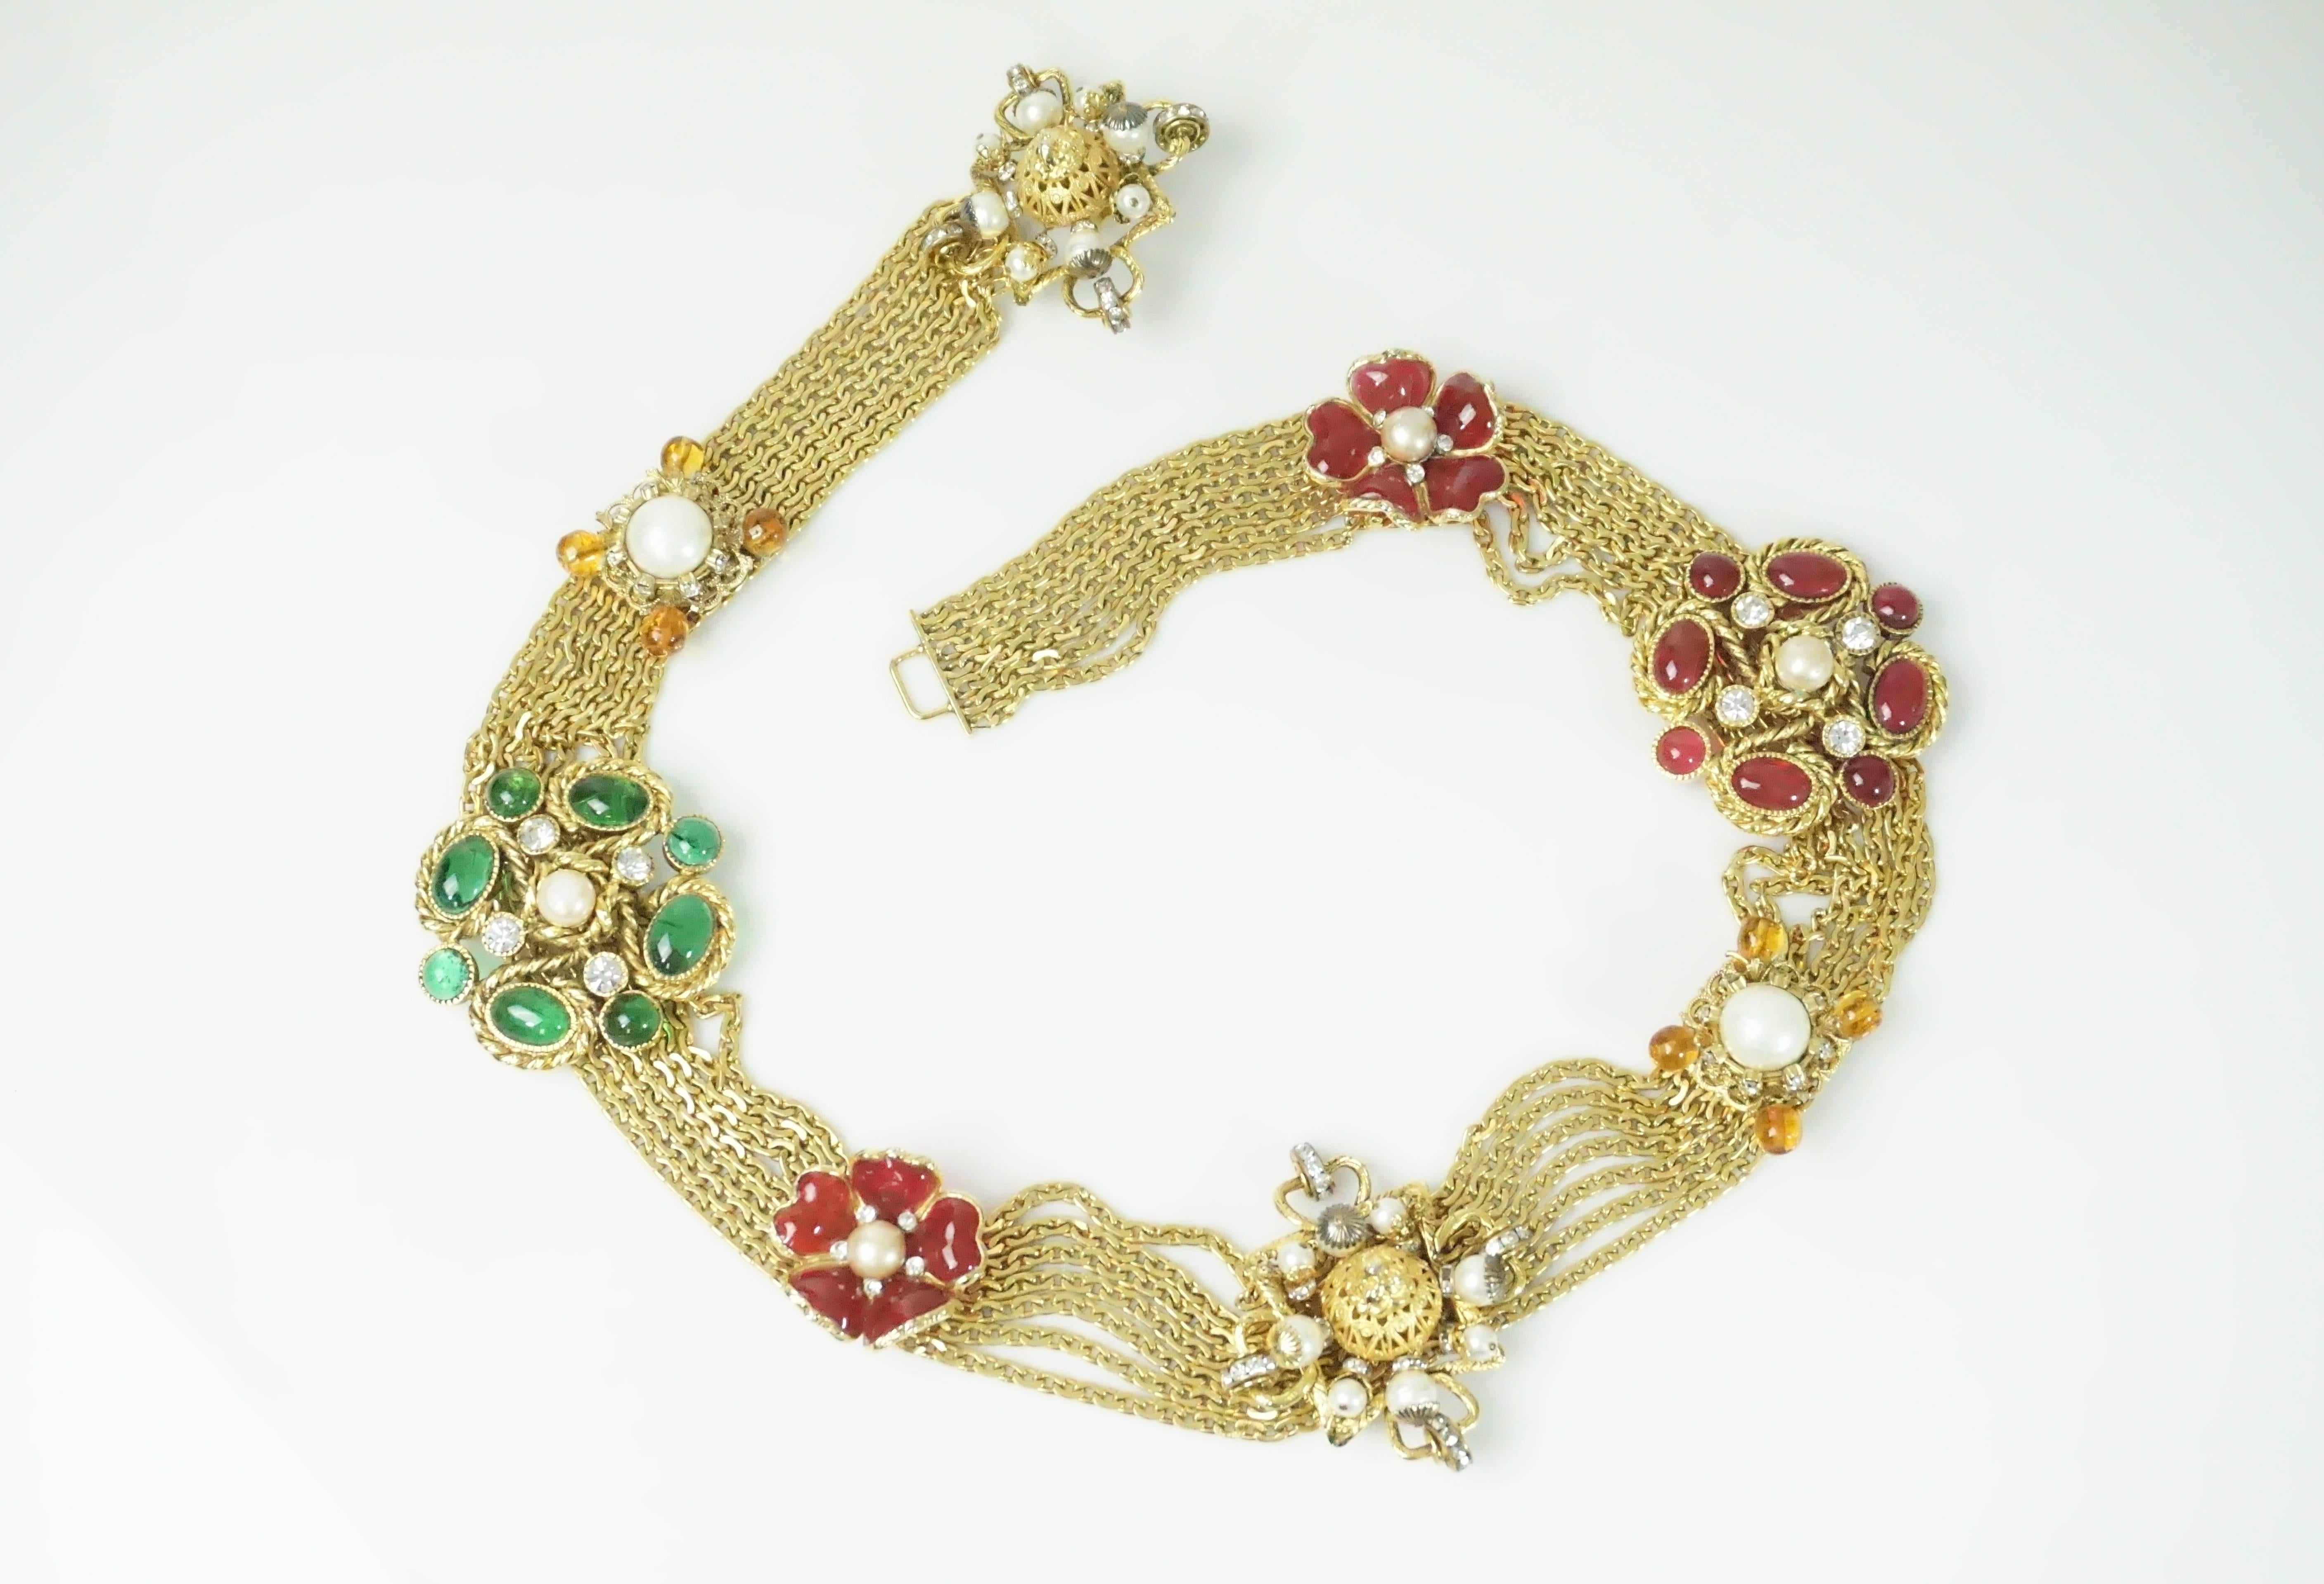 Chanel Gold Chain Link Belt/Necklace with Gripoix and Pearl Camelias-Circa 70's  This magnificent highly collectible belt can also be worn as a single strand or double choker style necklace. It has 8 uniquely created ornaments in the form of